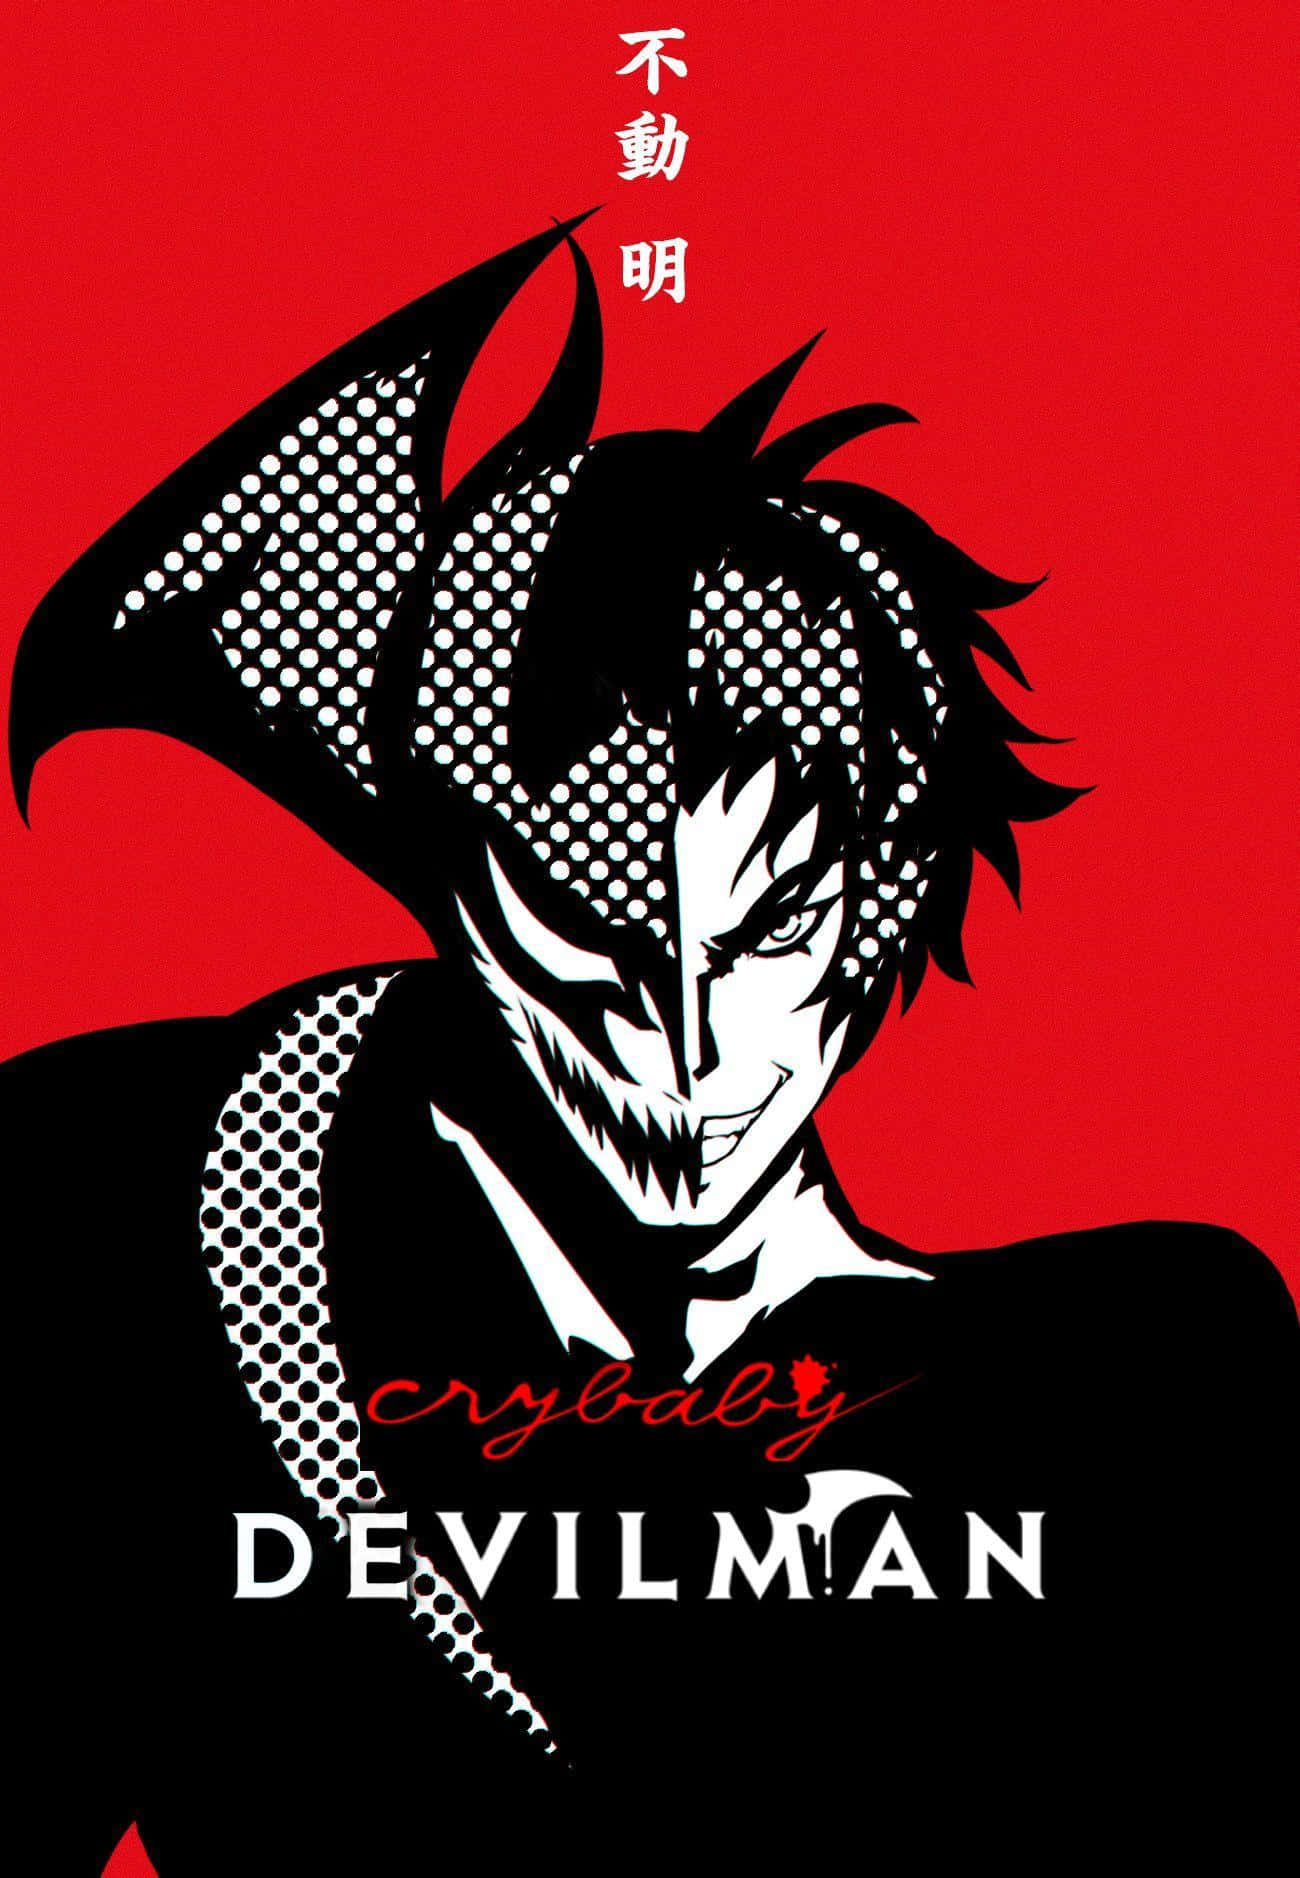 In the dark and emotional anime series Devilman Crybaby, Akira Fudo transforms into an unstoppable Devilman.